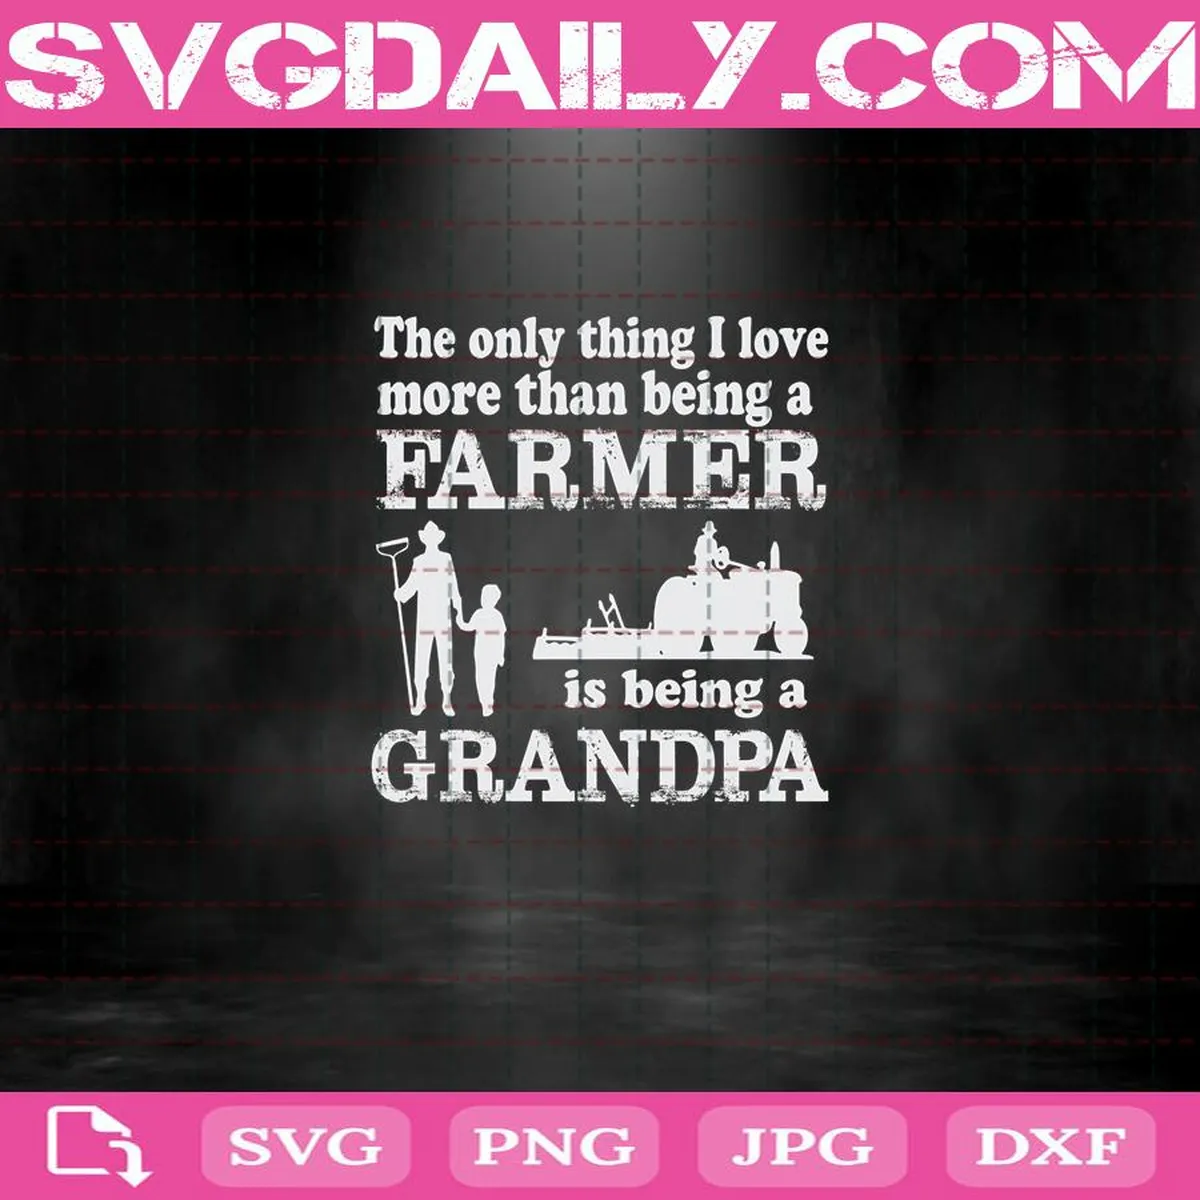 The Only Thing I Love More Than Being A Farmer Is Being A Grandpa Svg, Farmer Svg, Grandpa Svg, Fathers Day Svg